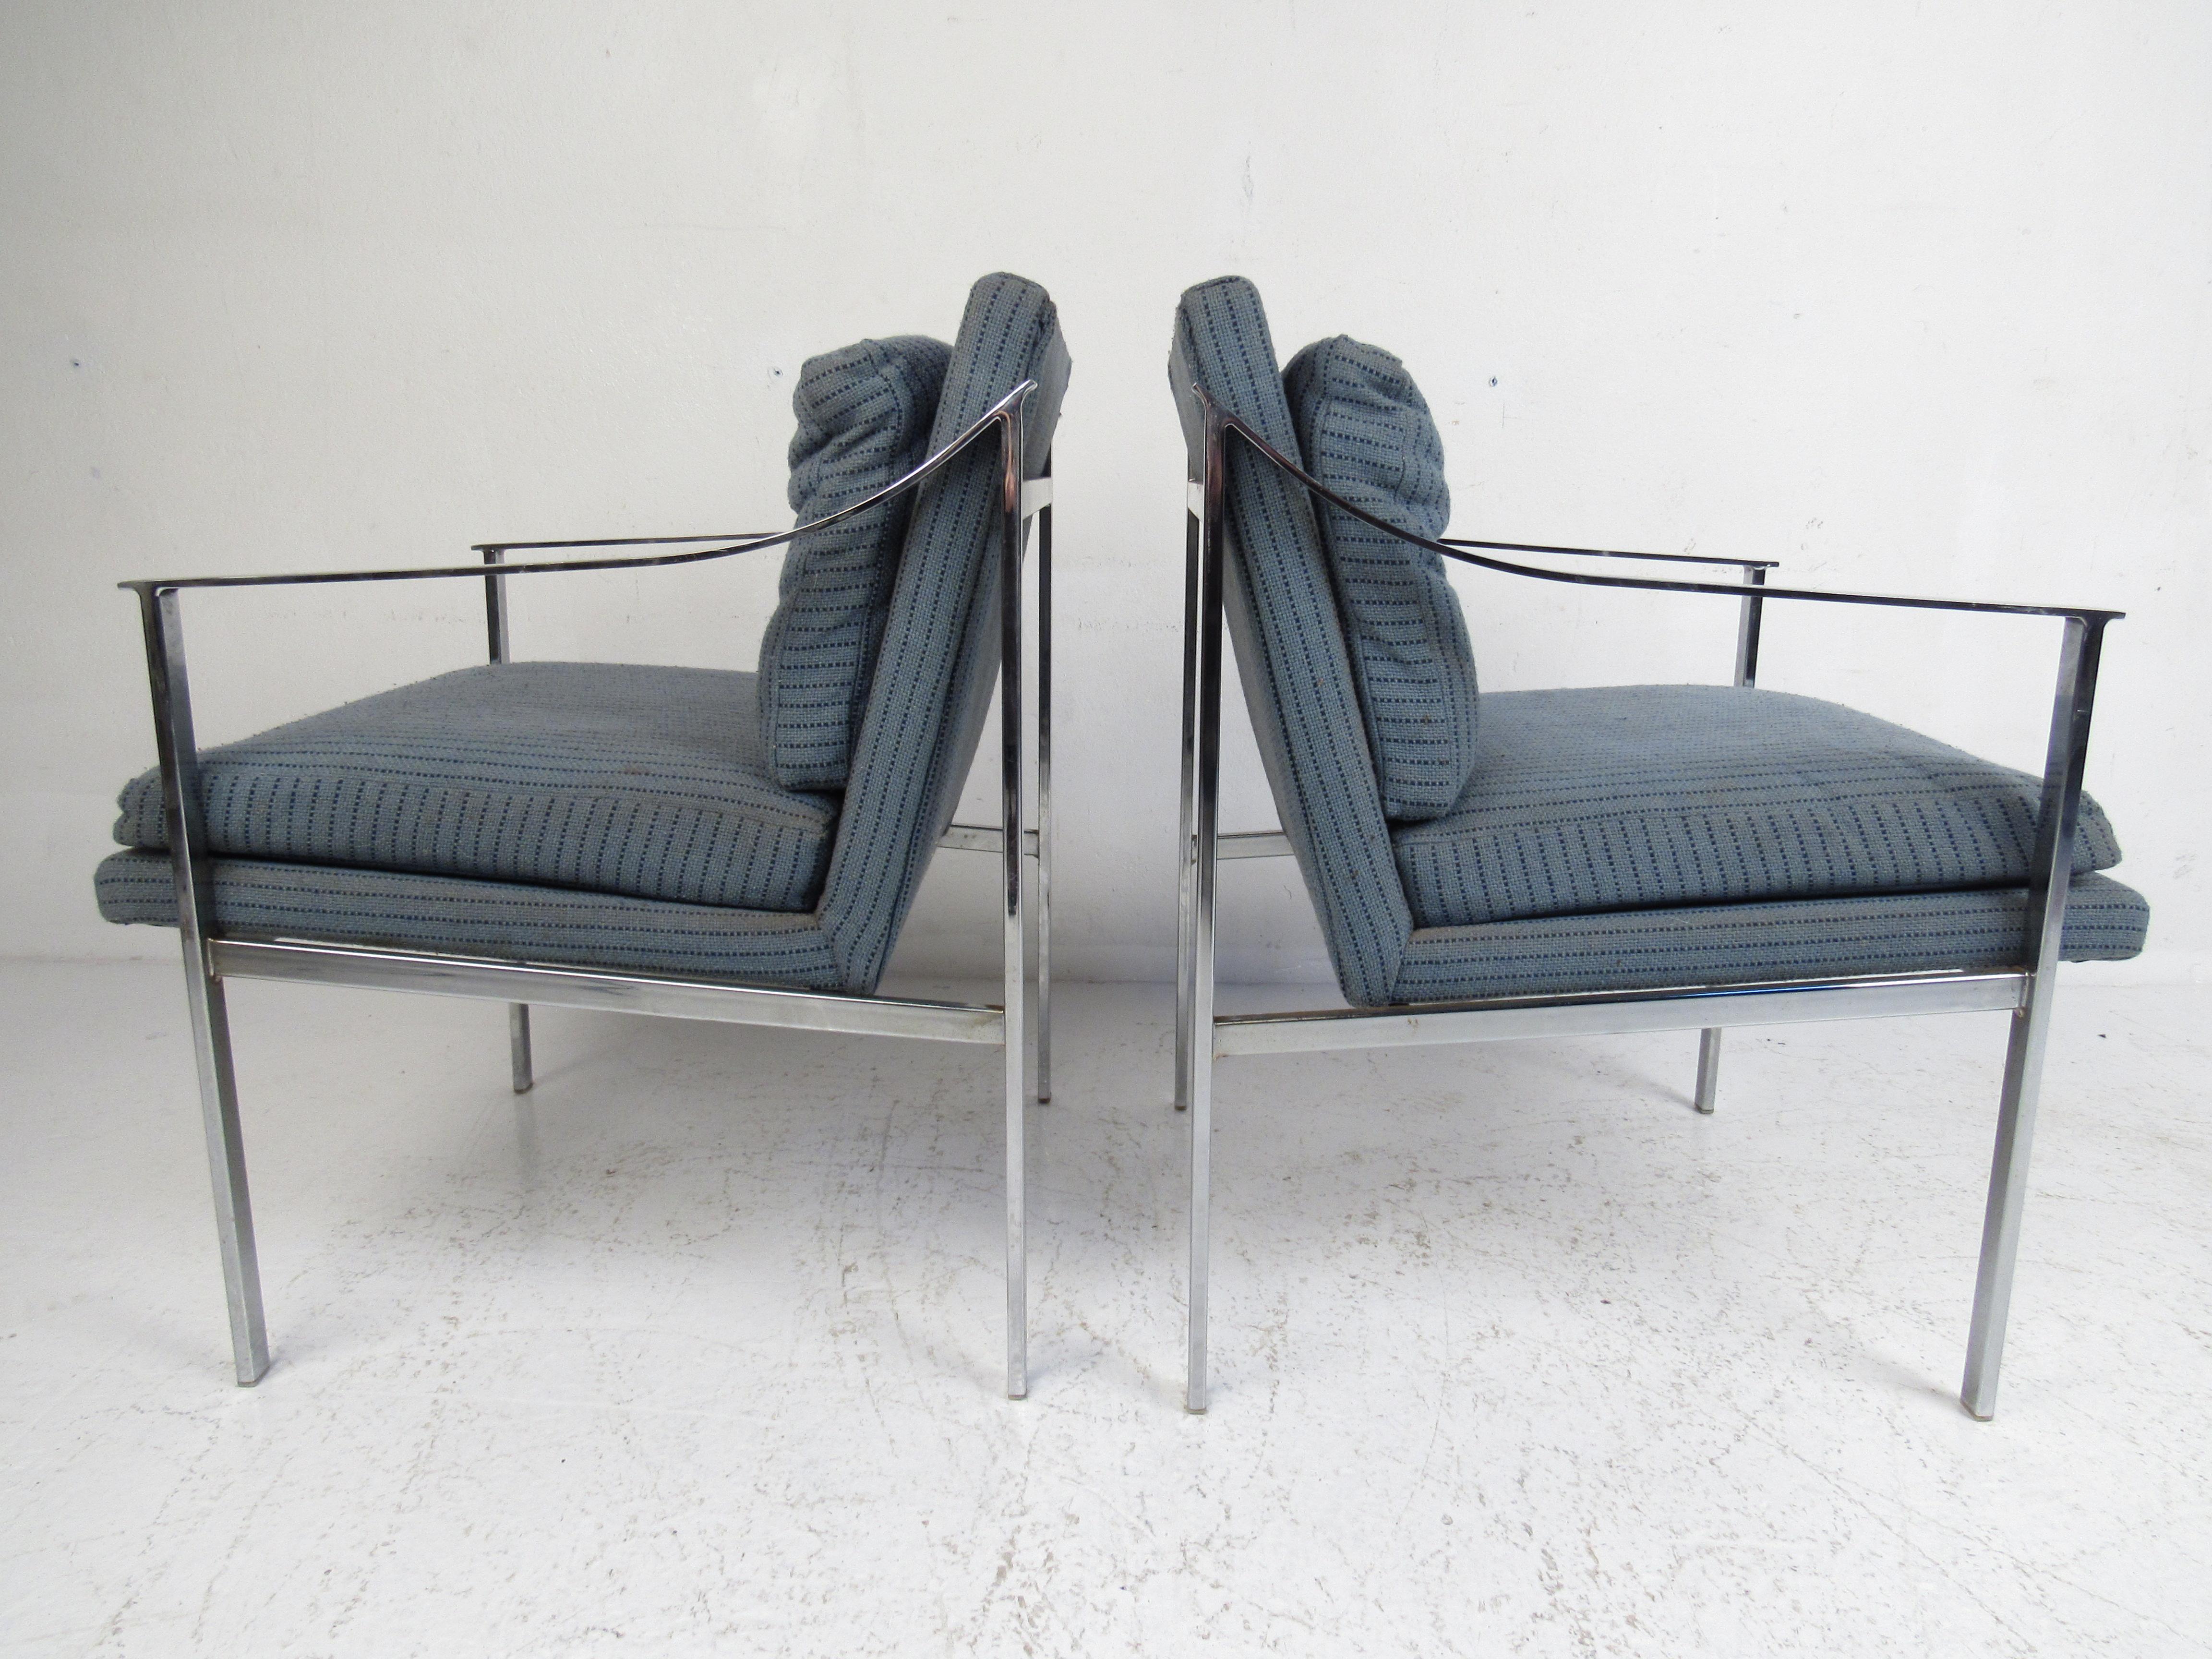 Late 20th Century Pair of Mid-Century Modern Chrome Lounge Chairs For Sale